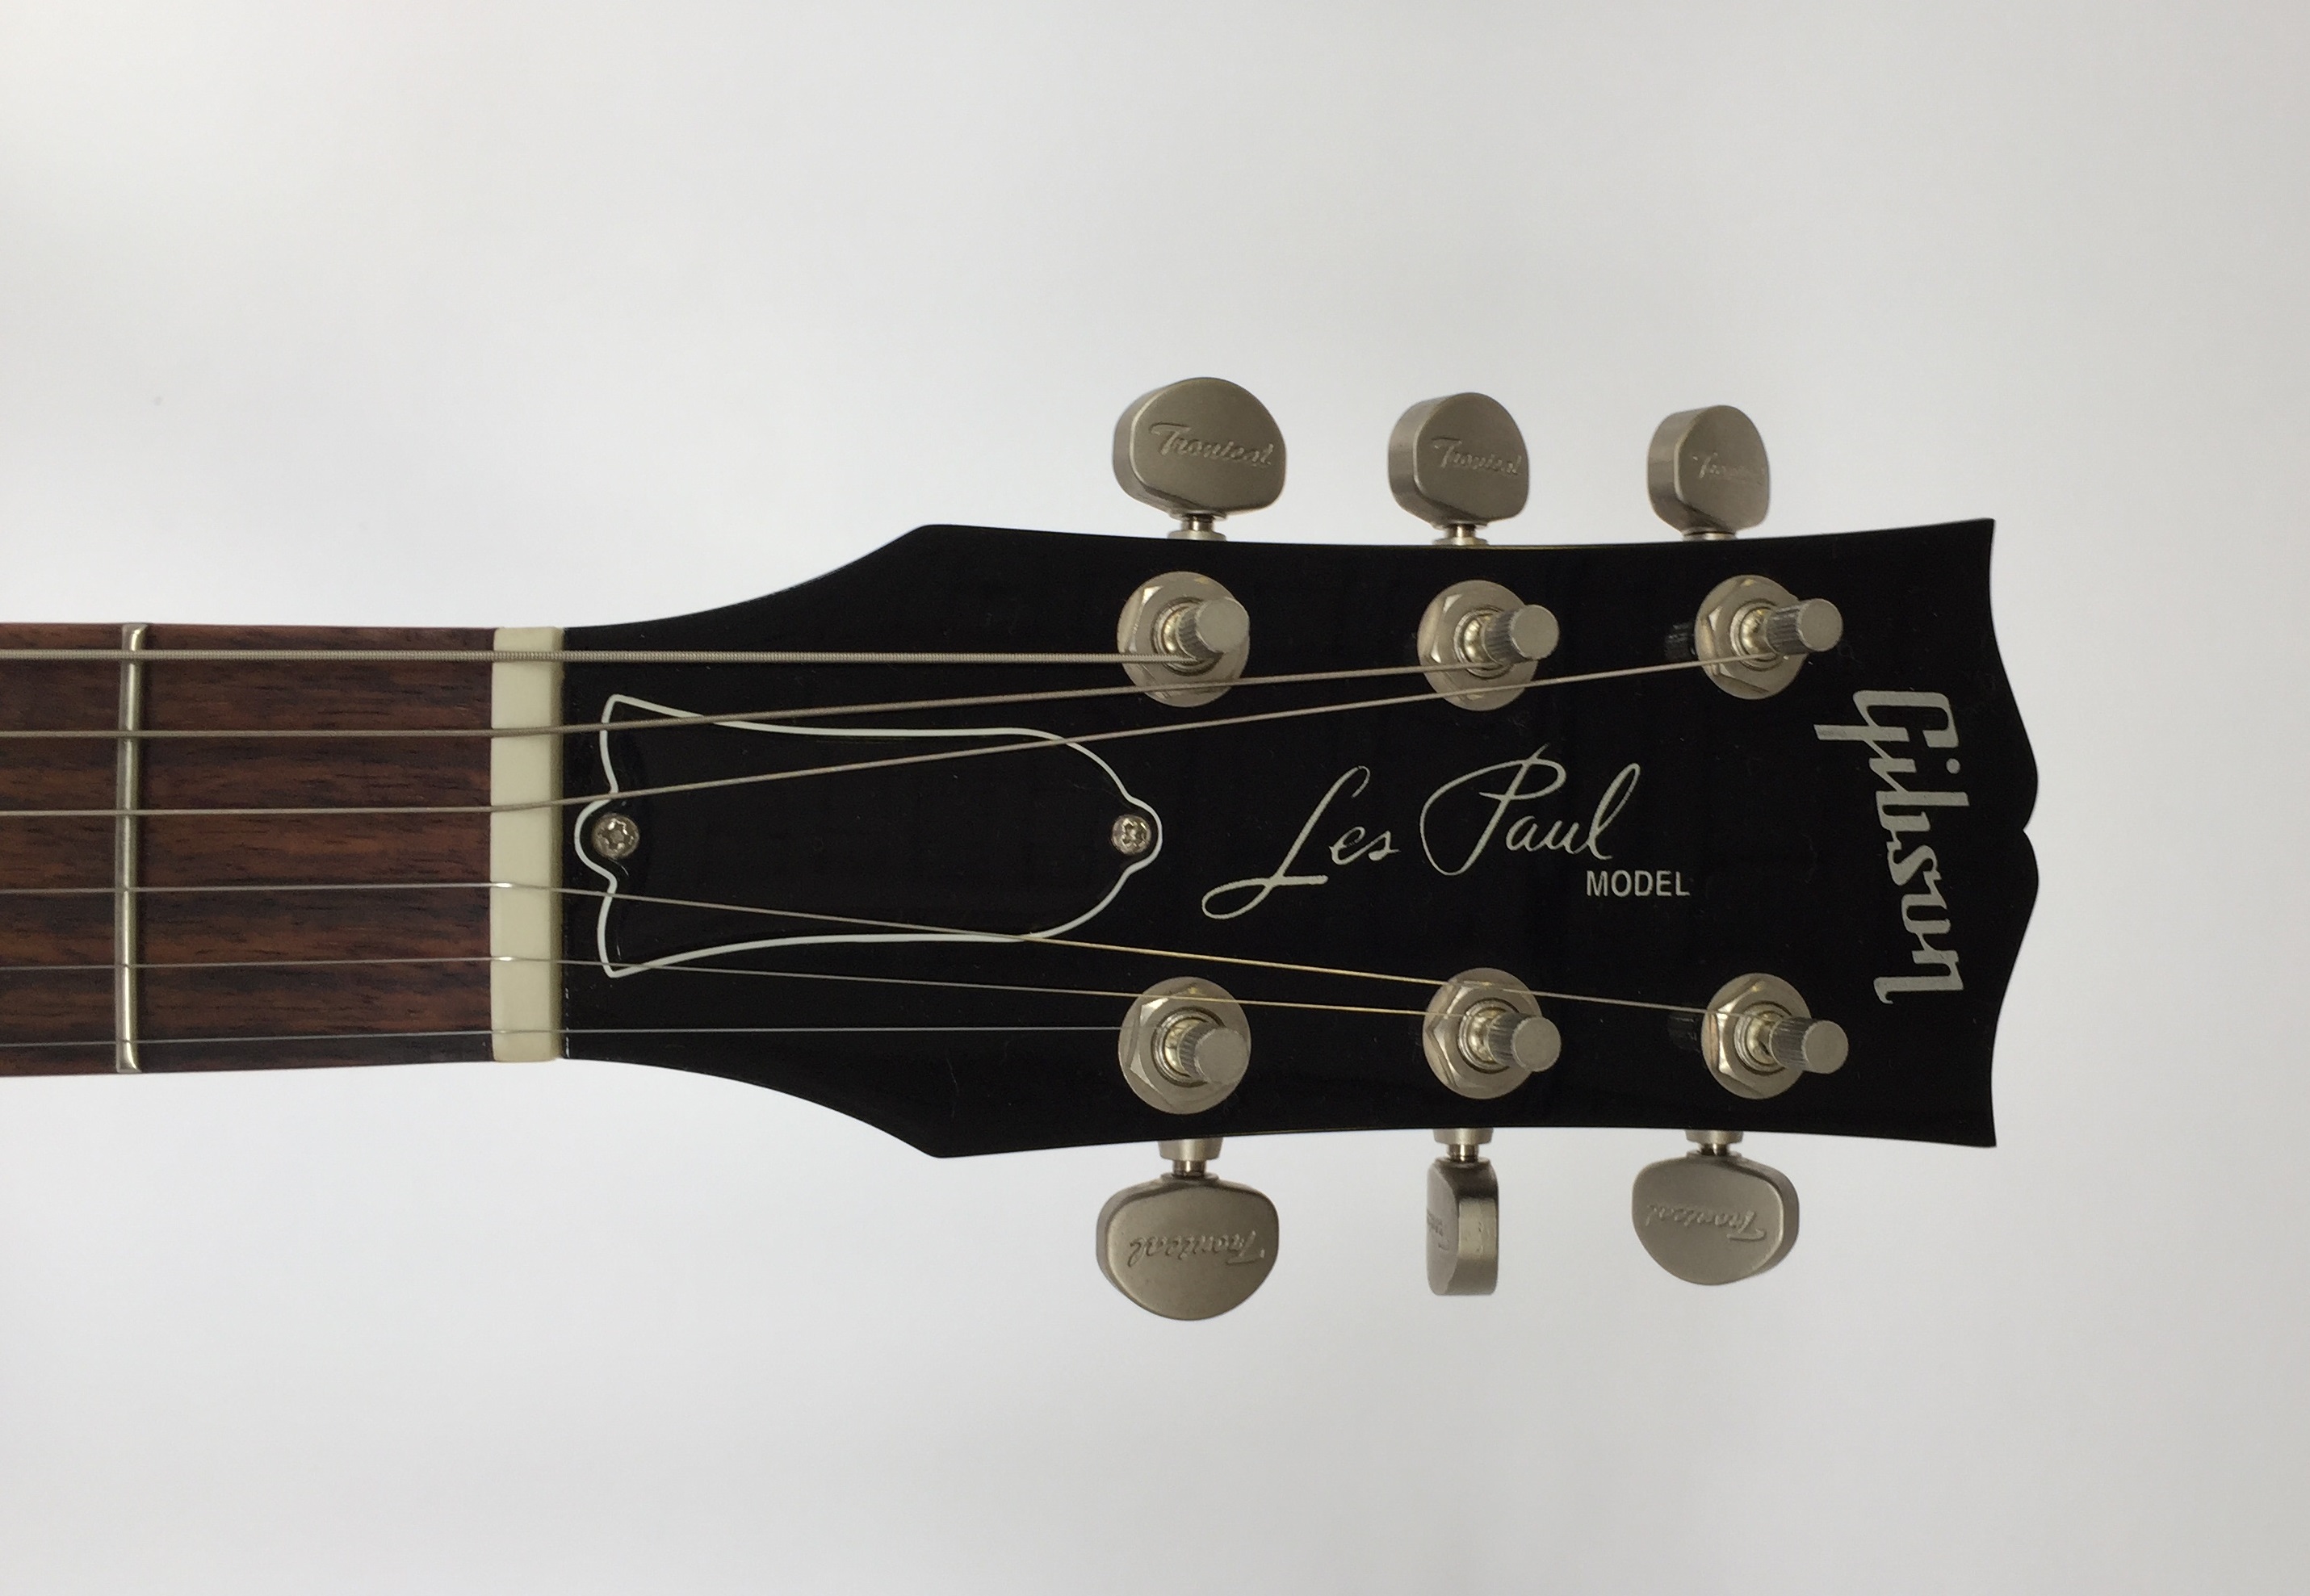 GIBSON LES PAUL ROBOT BLUE - Serial 026980641. - Image 3 of 8